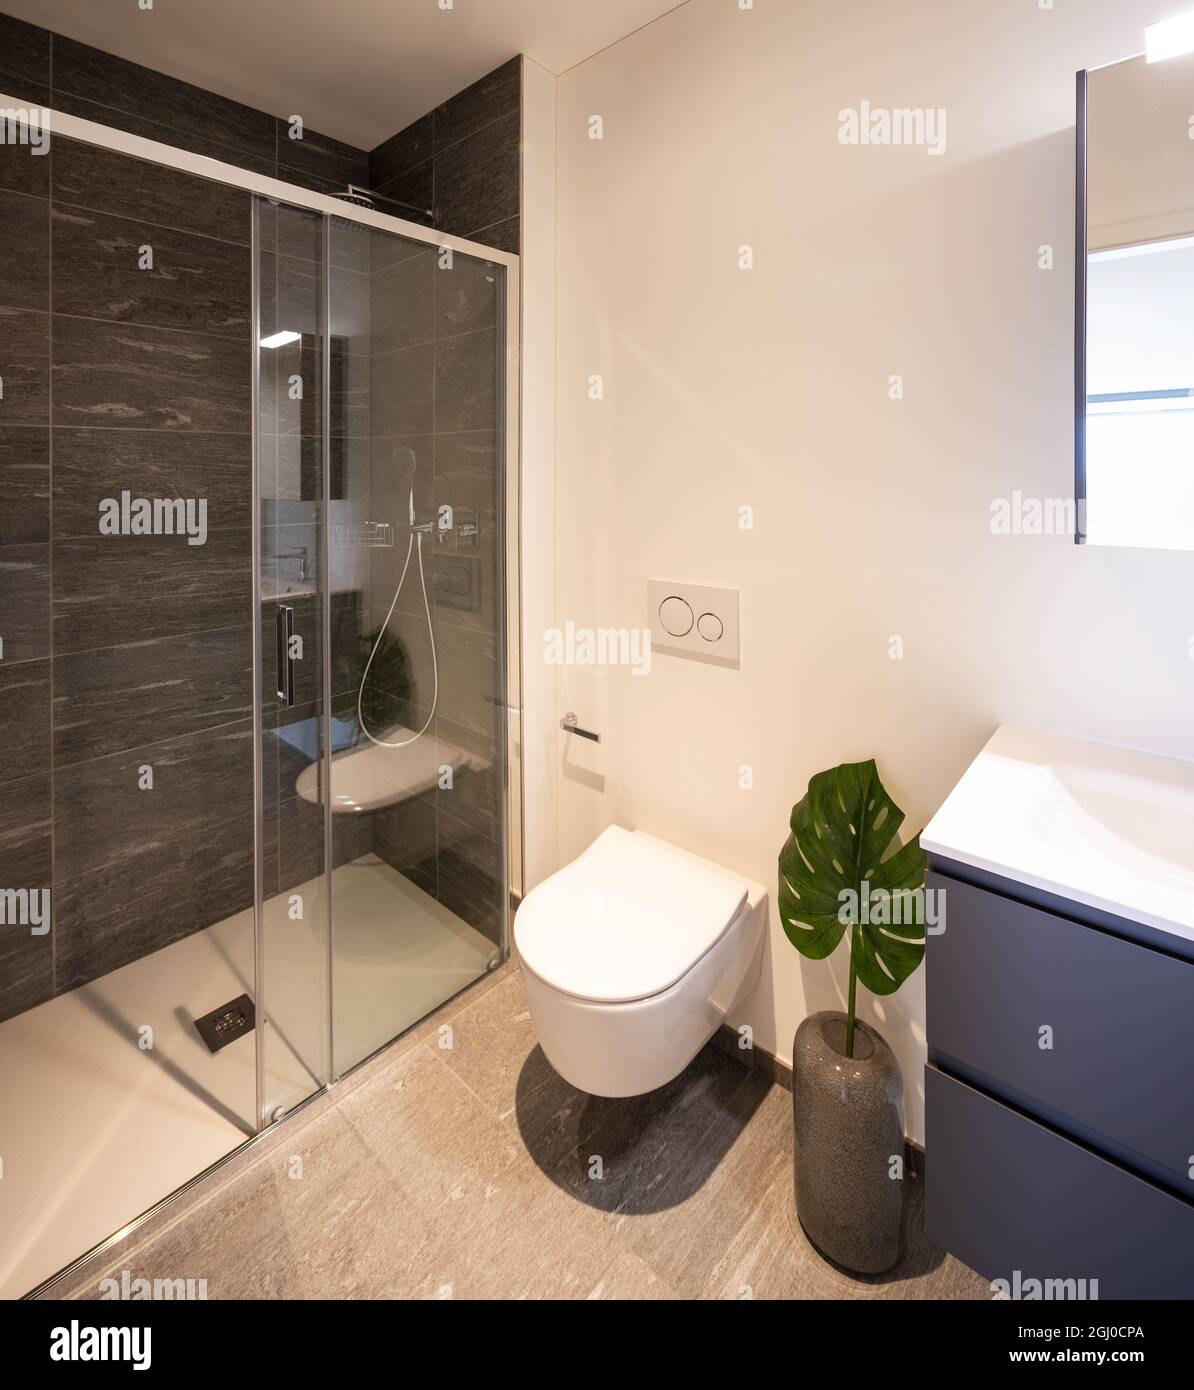 Interior of a bathroom, with shower and a leaf of a green plant. Stock Photo